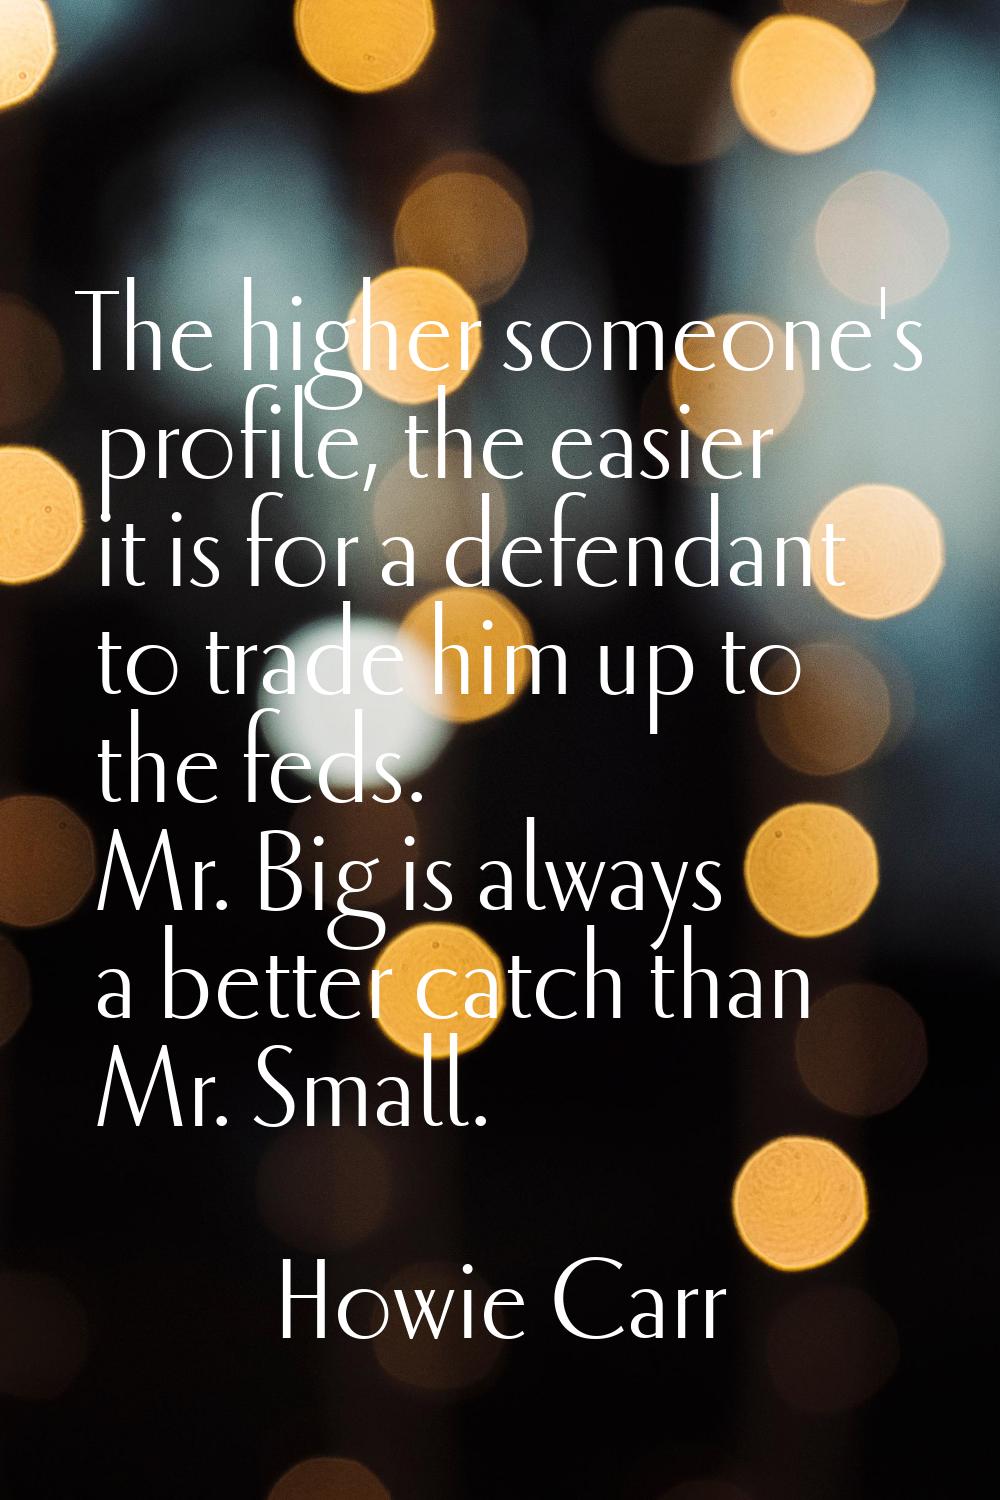 The higher someone's profile, the easier it is for a defendant to trade him up to the feds. Mr. Big